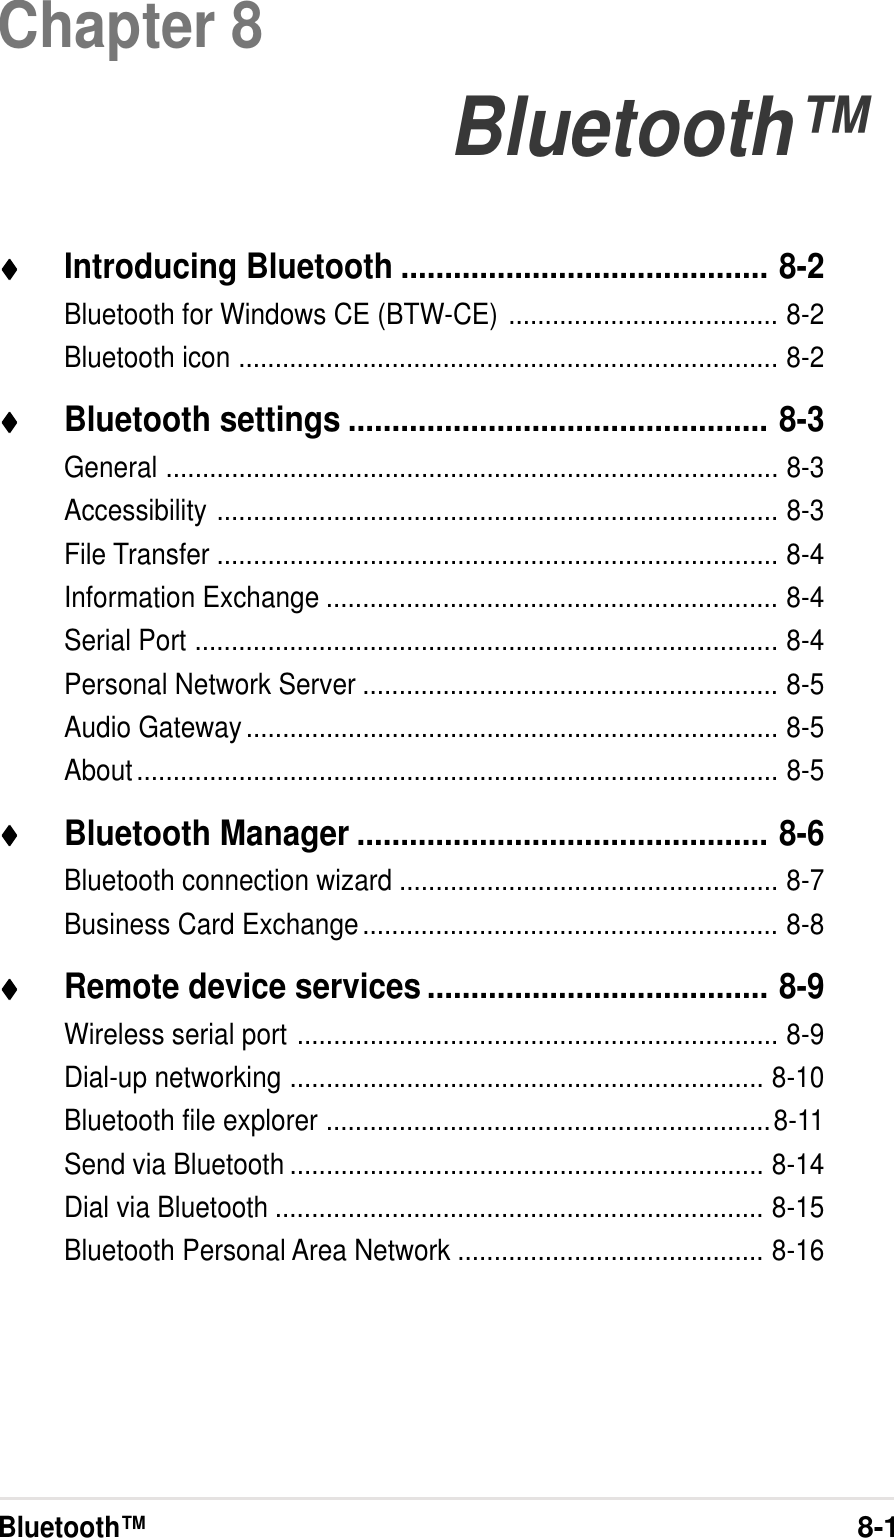 Bluetooth™8-1Chapter 8Bluetooth™♦♦♦♦♦Introducing Bluetooth .......................................... 8-2Bluetooth for Windows CE (BTW-CE) ..................................... 8-2Bluetooth icon .......................................................................... 8-2♦♦♦♦♦Bluetooth settings ................................................ 8-3General .................................................................................... 8-3Accessibility ............................................................................. 8-3File Transfer ............................................................................. 8-4Information Exchange .............................................................. 8-4Serial Port ................................................................................ 8-4Personal Network Server ......................................................... 8-5Audio Gateway......................................................................... 8-5About........................................................................................ 8-5♦♦♦♦♦Bluetooth Manager ............................................... 8-6Bluetooth connection wizard .................................................... 8-7Business Card Exchange......................................................... 8-8♦♦♦♦♦Remote device services ....................................... 8-9Wireless serial port .................................................................. 8-9Dial-up networking ................................................................. 8-10Bluetooth file explorer .............................................................8-11Send via Bluetooth ................................................................. 8-14Dial via Bluetooth ................................................................... 8-15Bluetooth Personal Area Network .......................................... 8-16